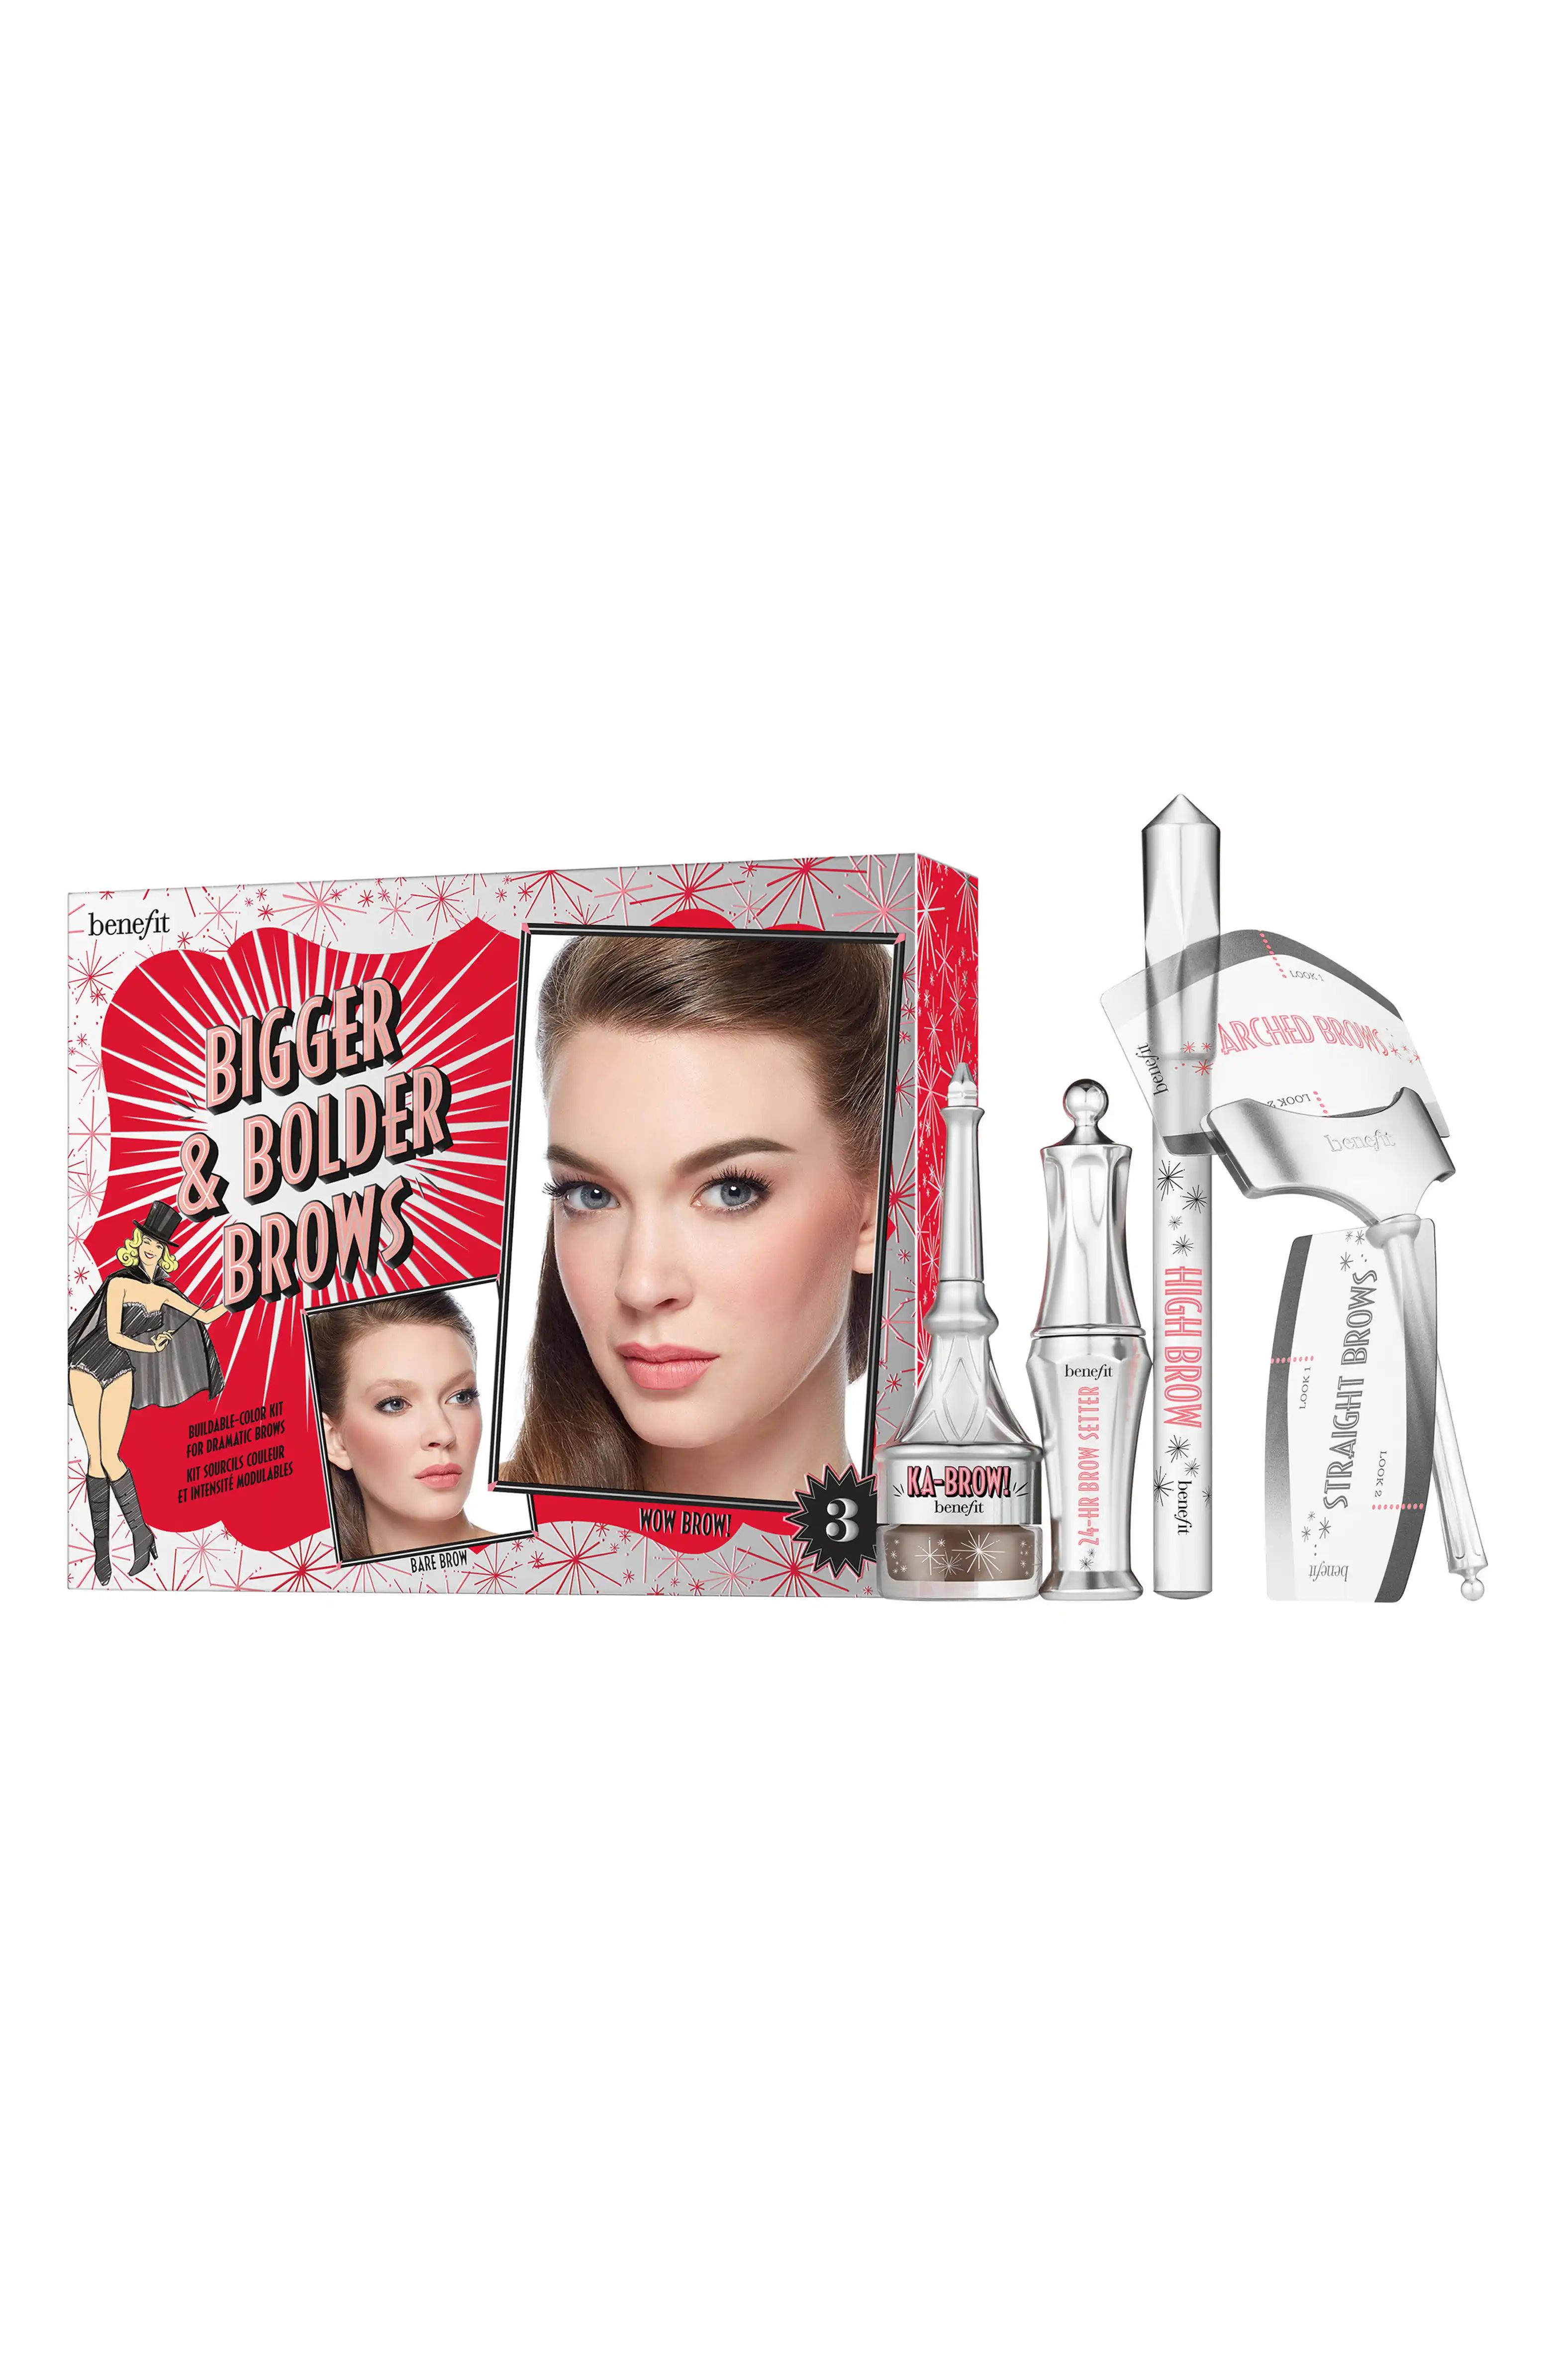 Benefit Bigger & Bolder Brows Kit Buildable Color Kit for Dramatic BrowsBENEFIT COSMETICS | Nordstrom